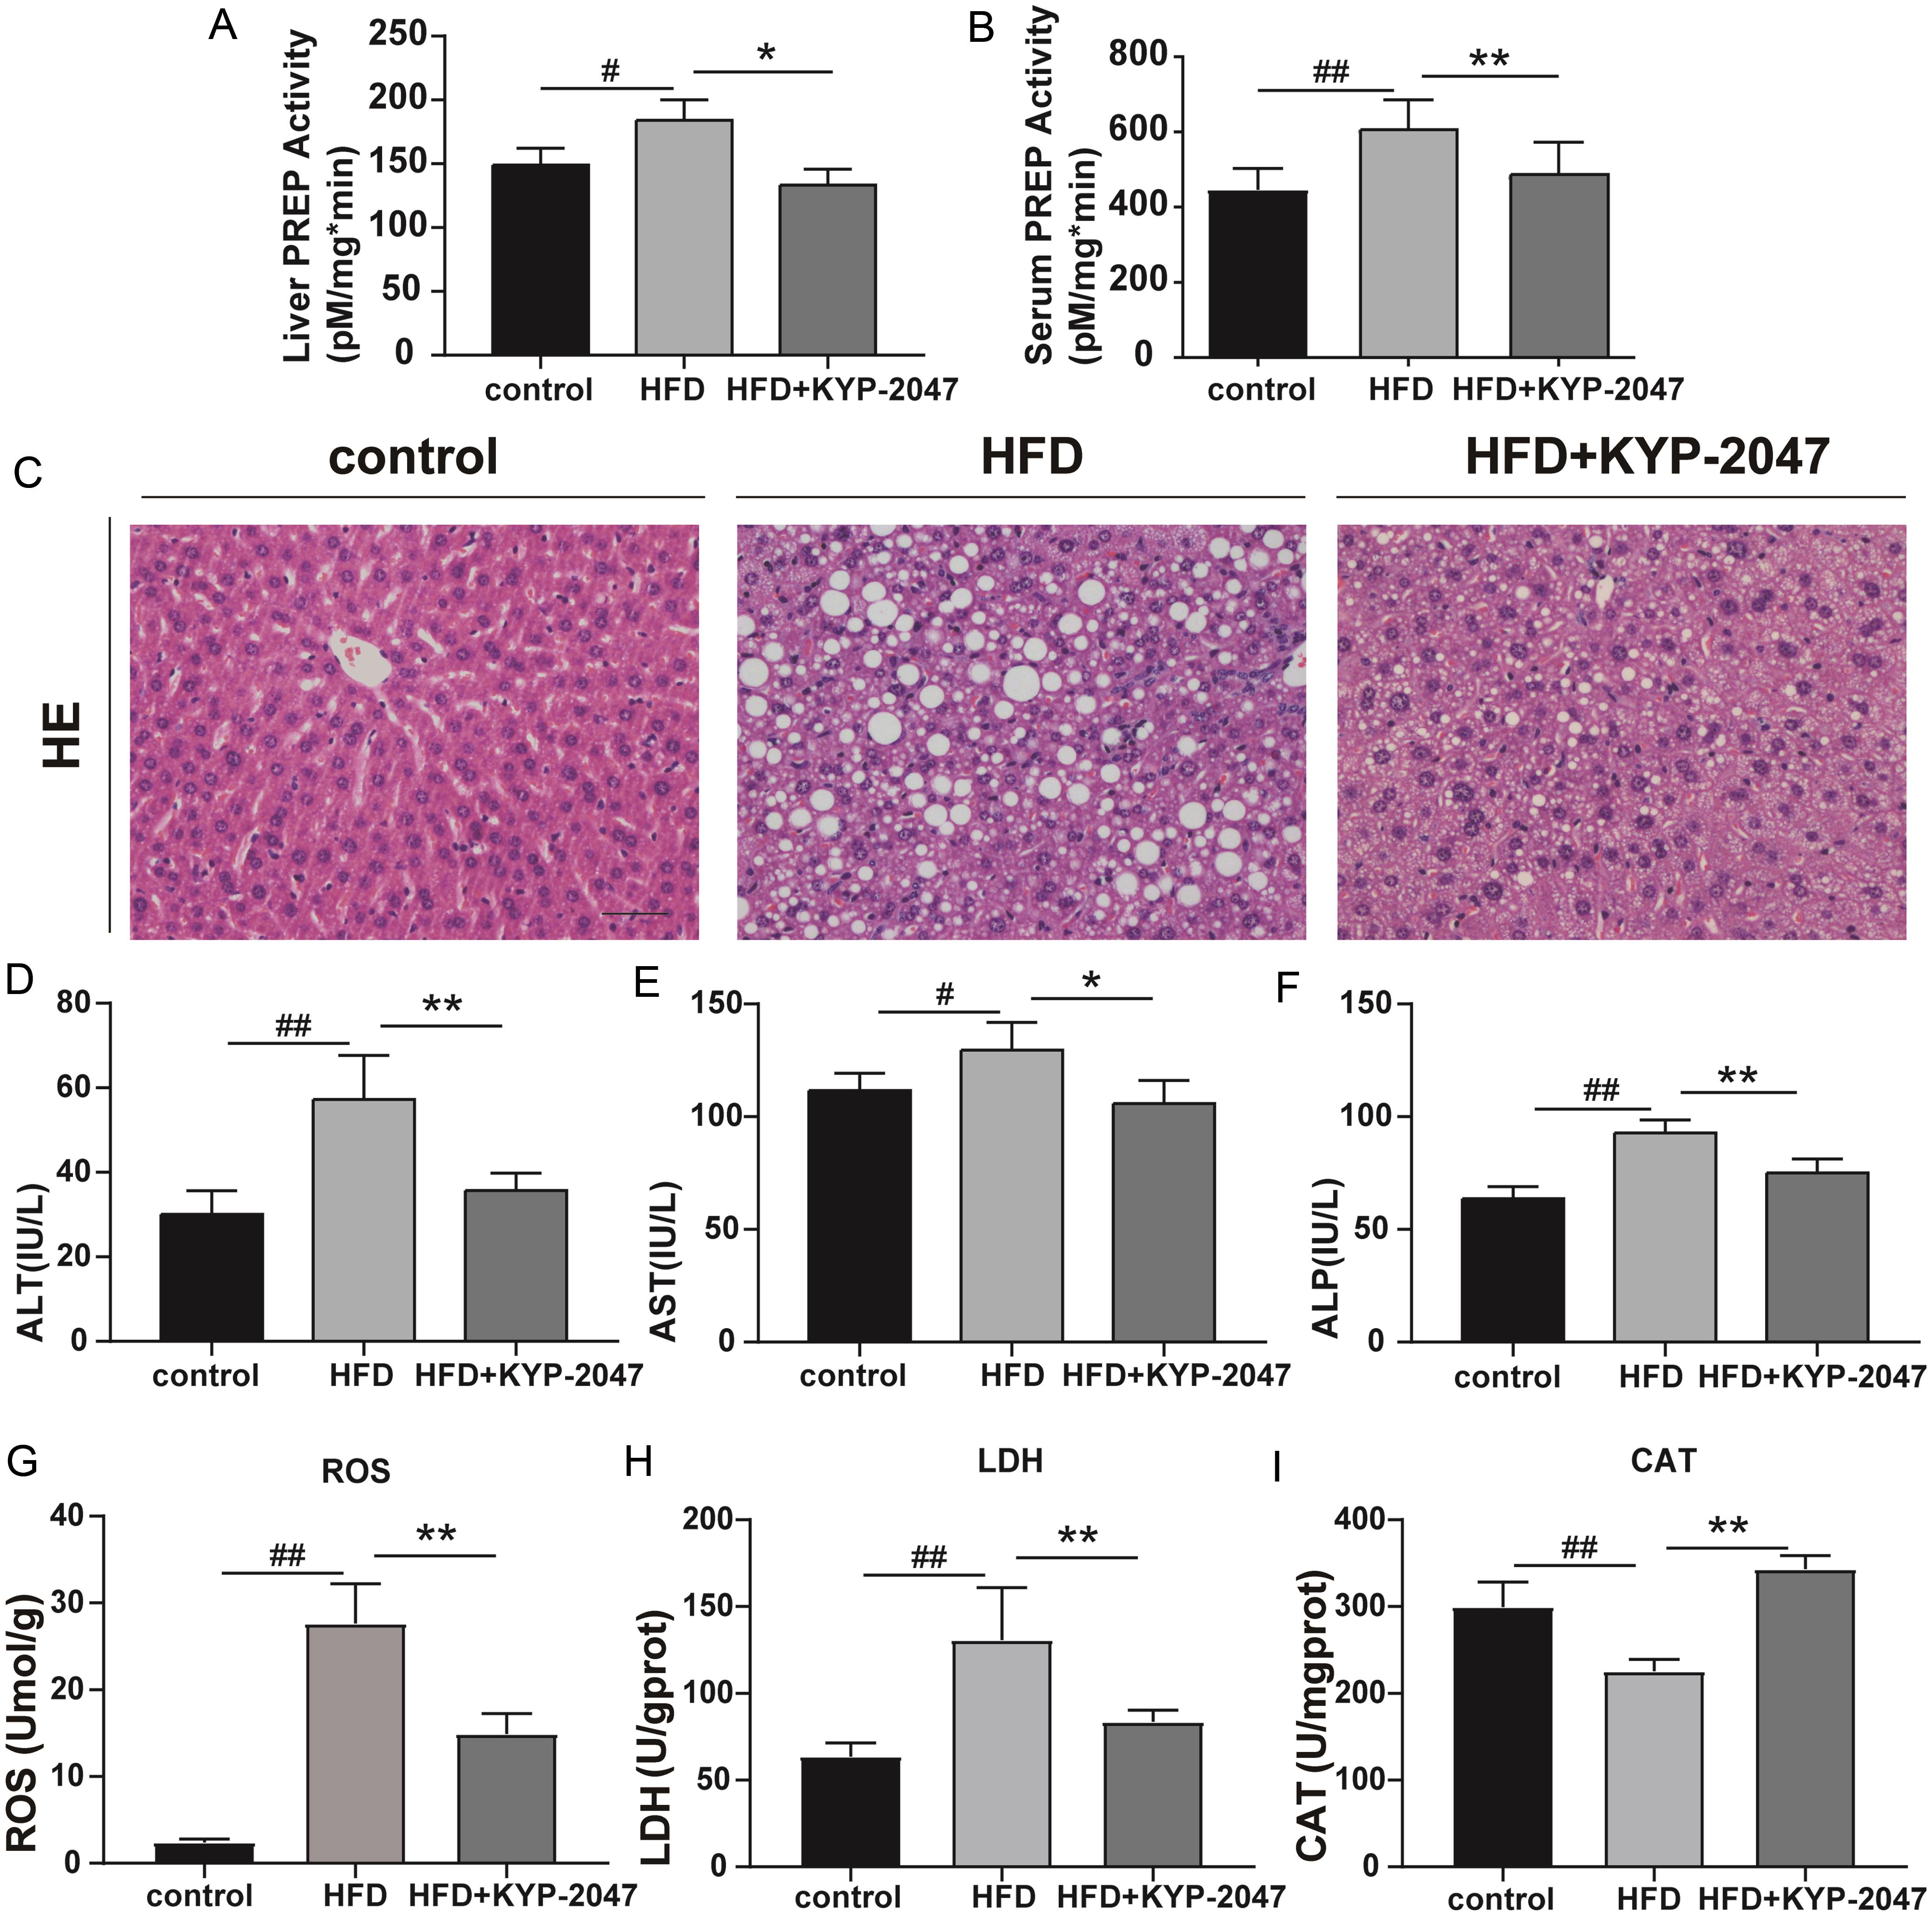 PREP inhibitor improved hepatic pathology and serological indicators of liver function in HFD-induced MAFLD.